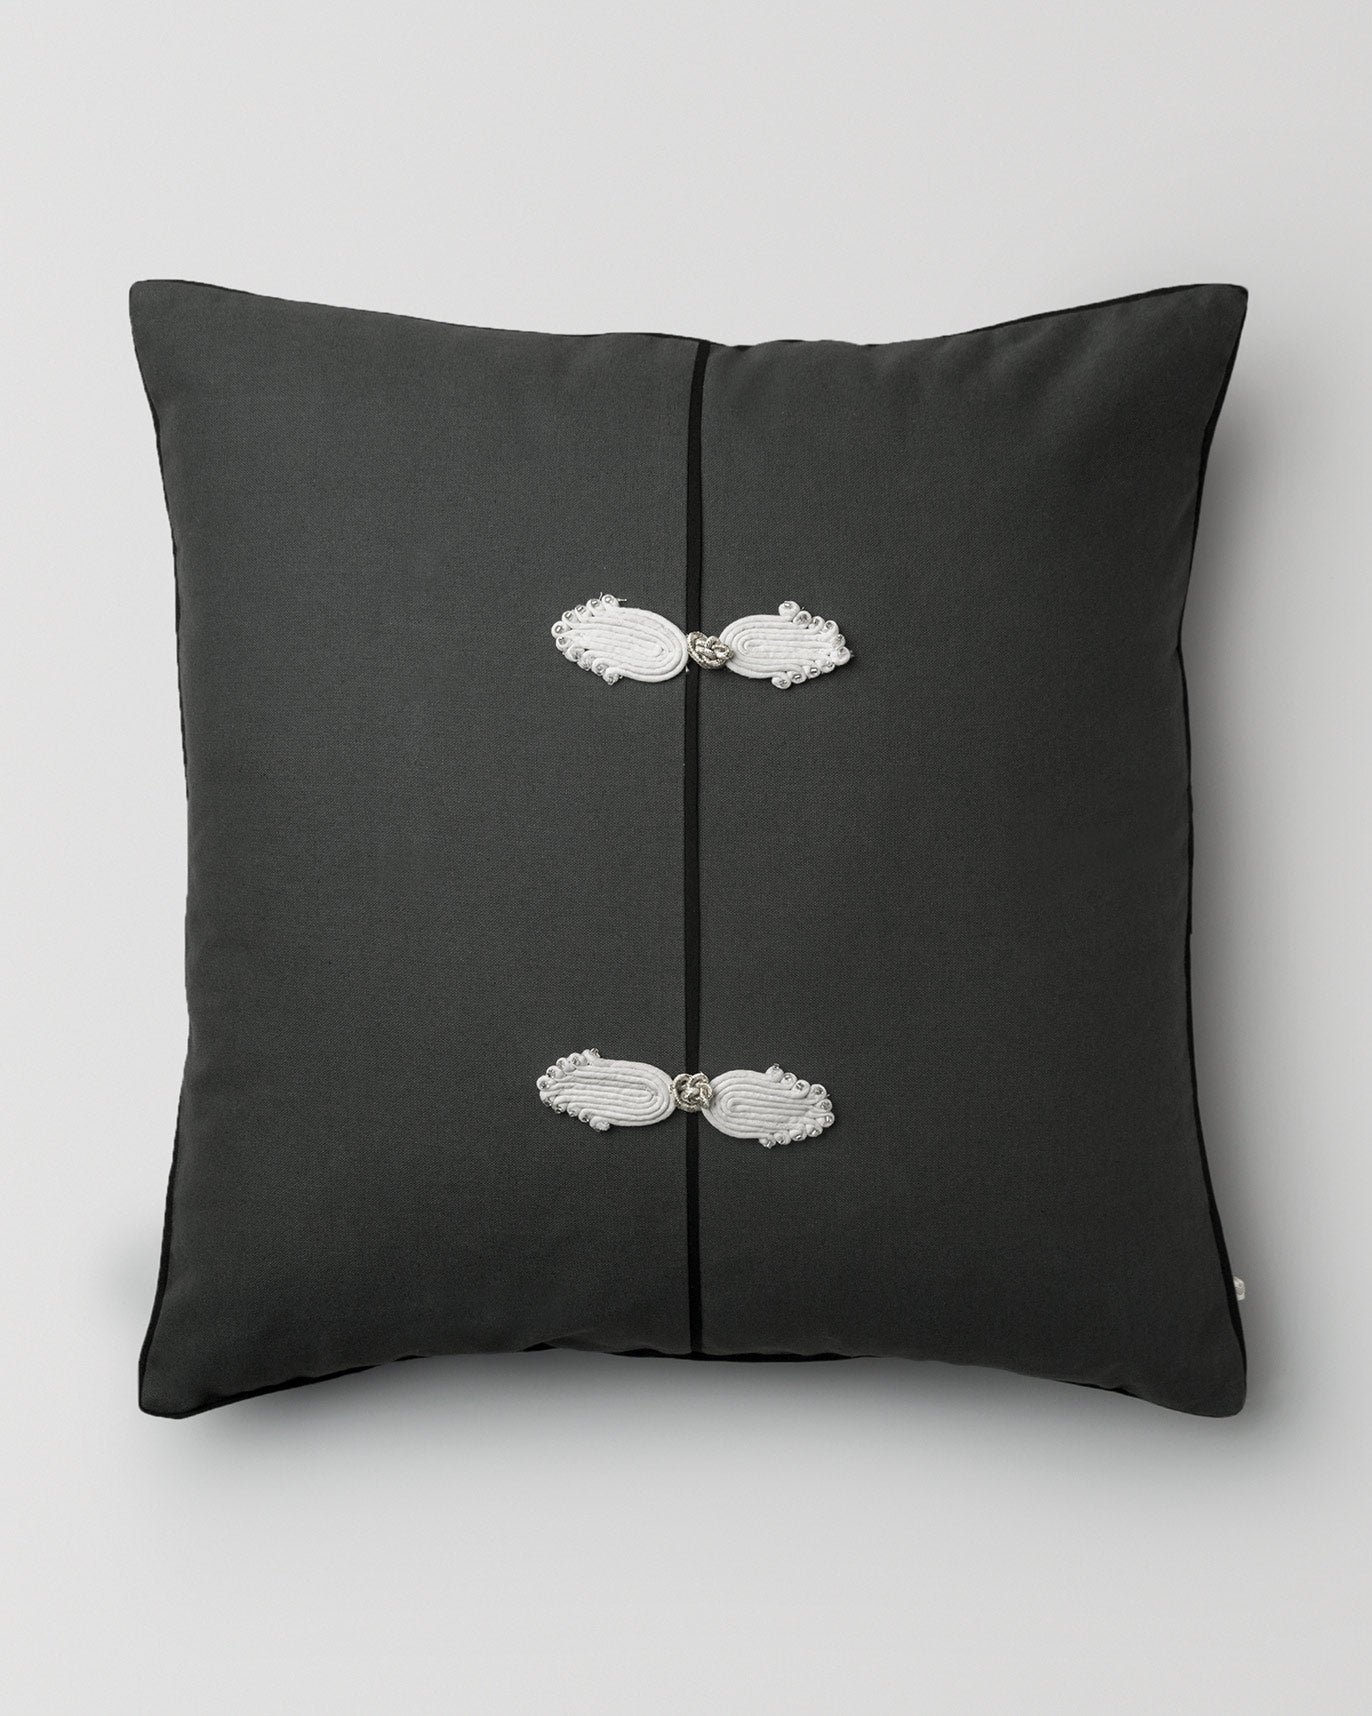 Chinese Knot Cushion Cover - Charcoal